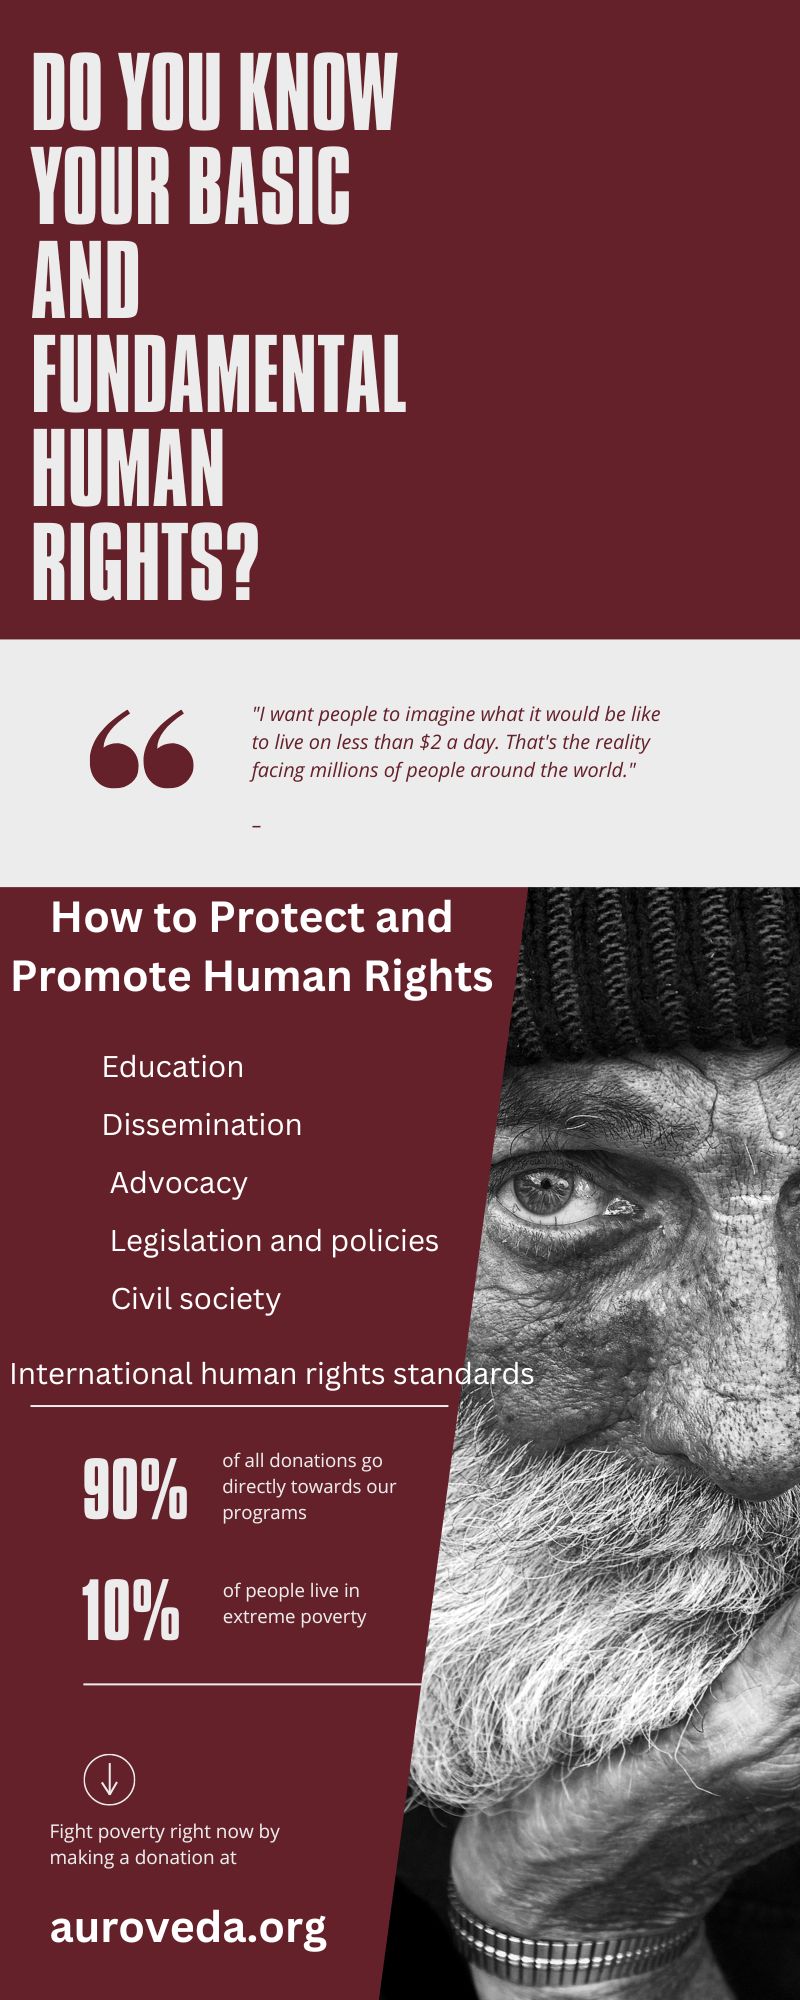 Do You Know Your Basic and Fundamental Human Rights.jpg | Pearltrees